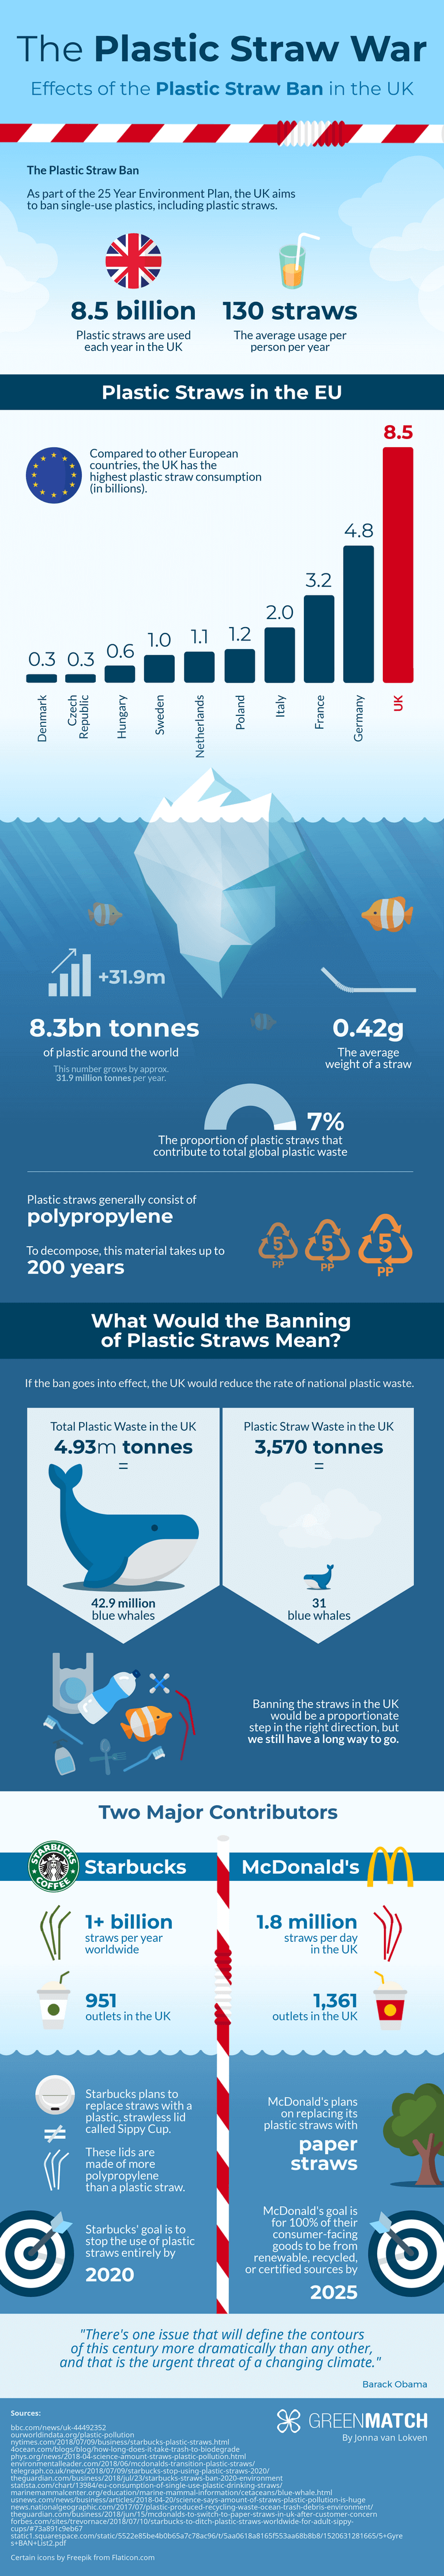 Effects of the Plastic Straw Ban in the UK | GreenMatch